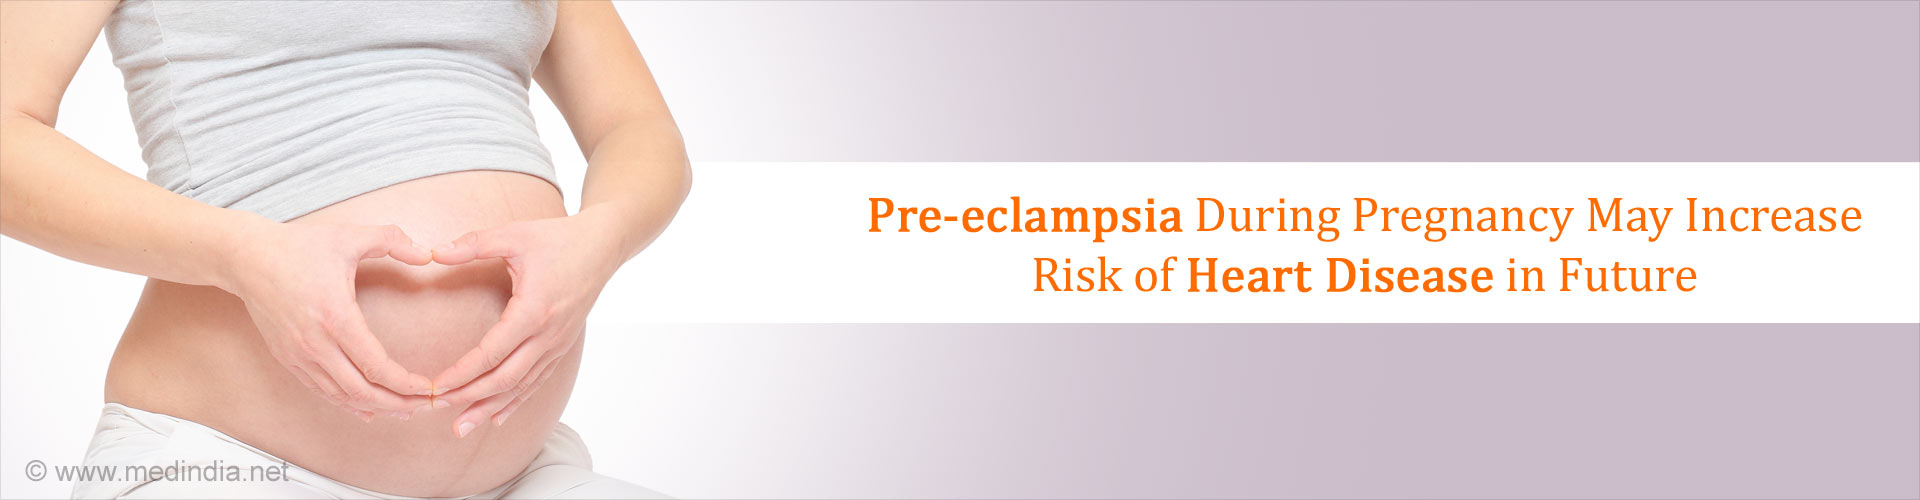 Pre-eclampsia During Pregnancy May Increase Risk of Heart Disease in Future